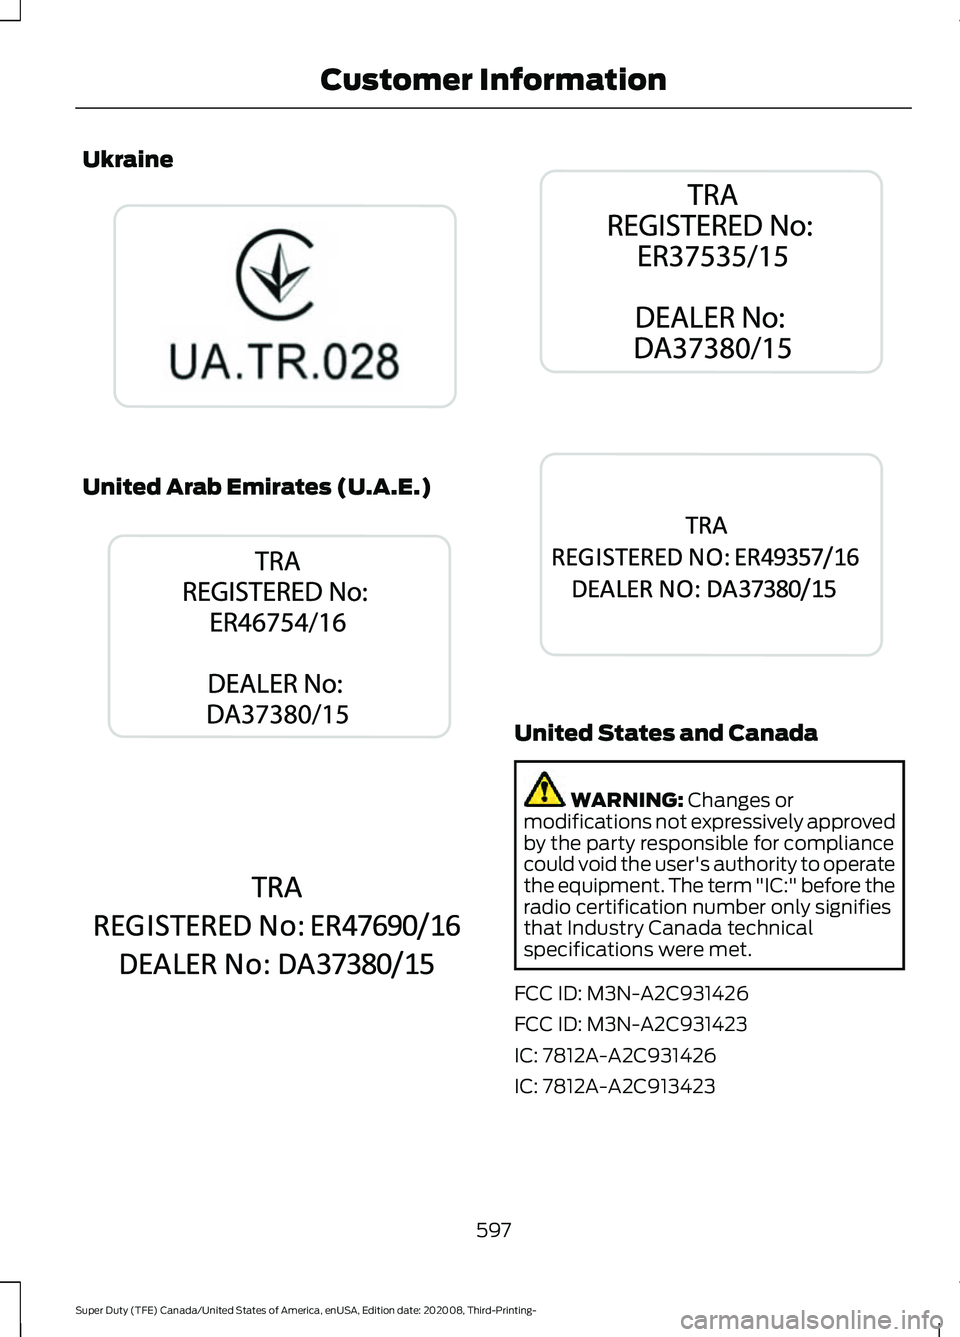 FORD F-450 2021  Owners Manual Ukraine
United Arab Emirates (U.A.E.)
United States and Canada
WARNING: Changes or
modifications not expressively approved
by the party responsible for compliance
could void the user's authority t